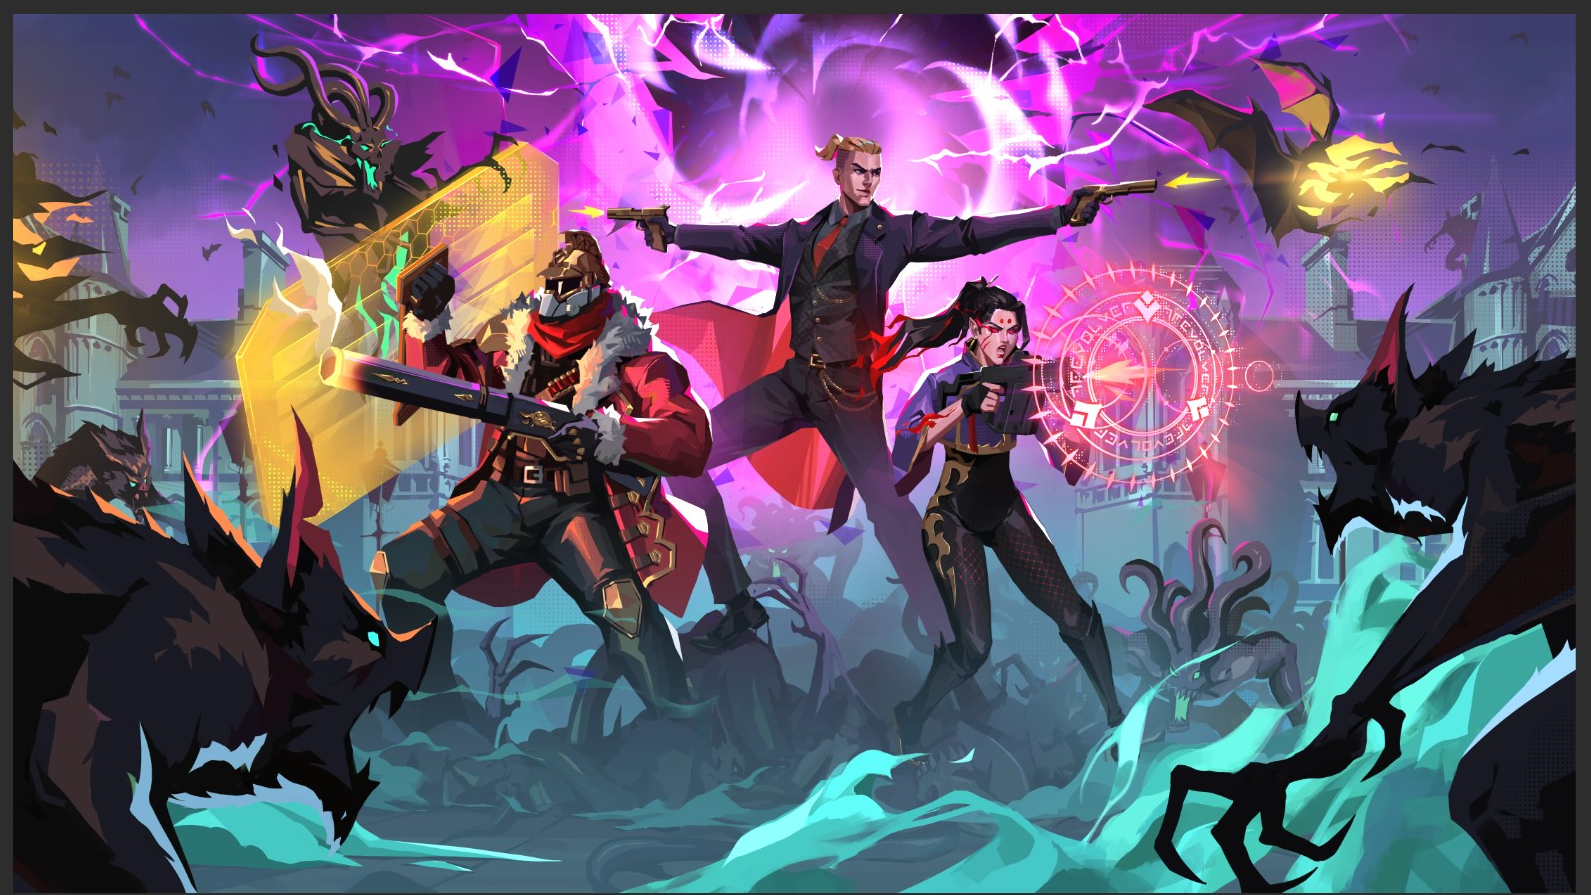 A Mythic Protocol poster showing the characters fighting enemies. Two characters using guns to eliminate monsters and another one using magic.